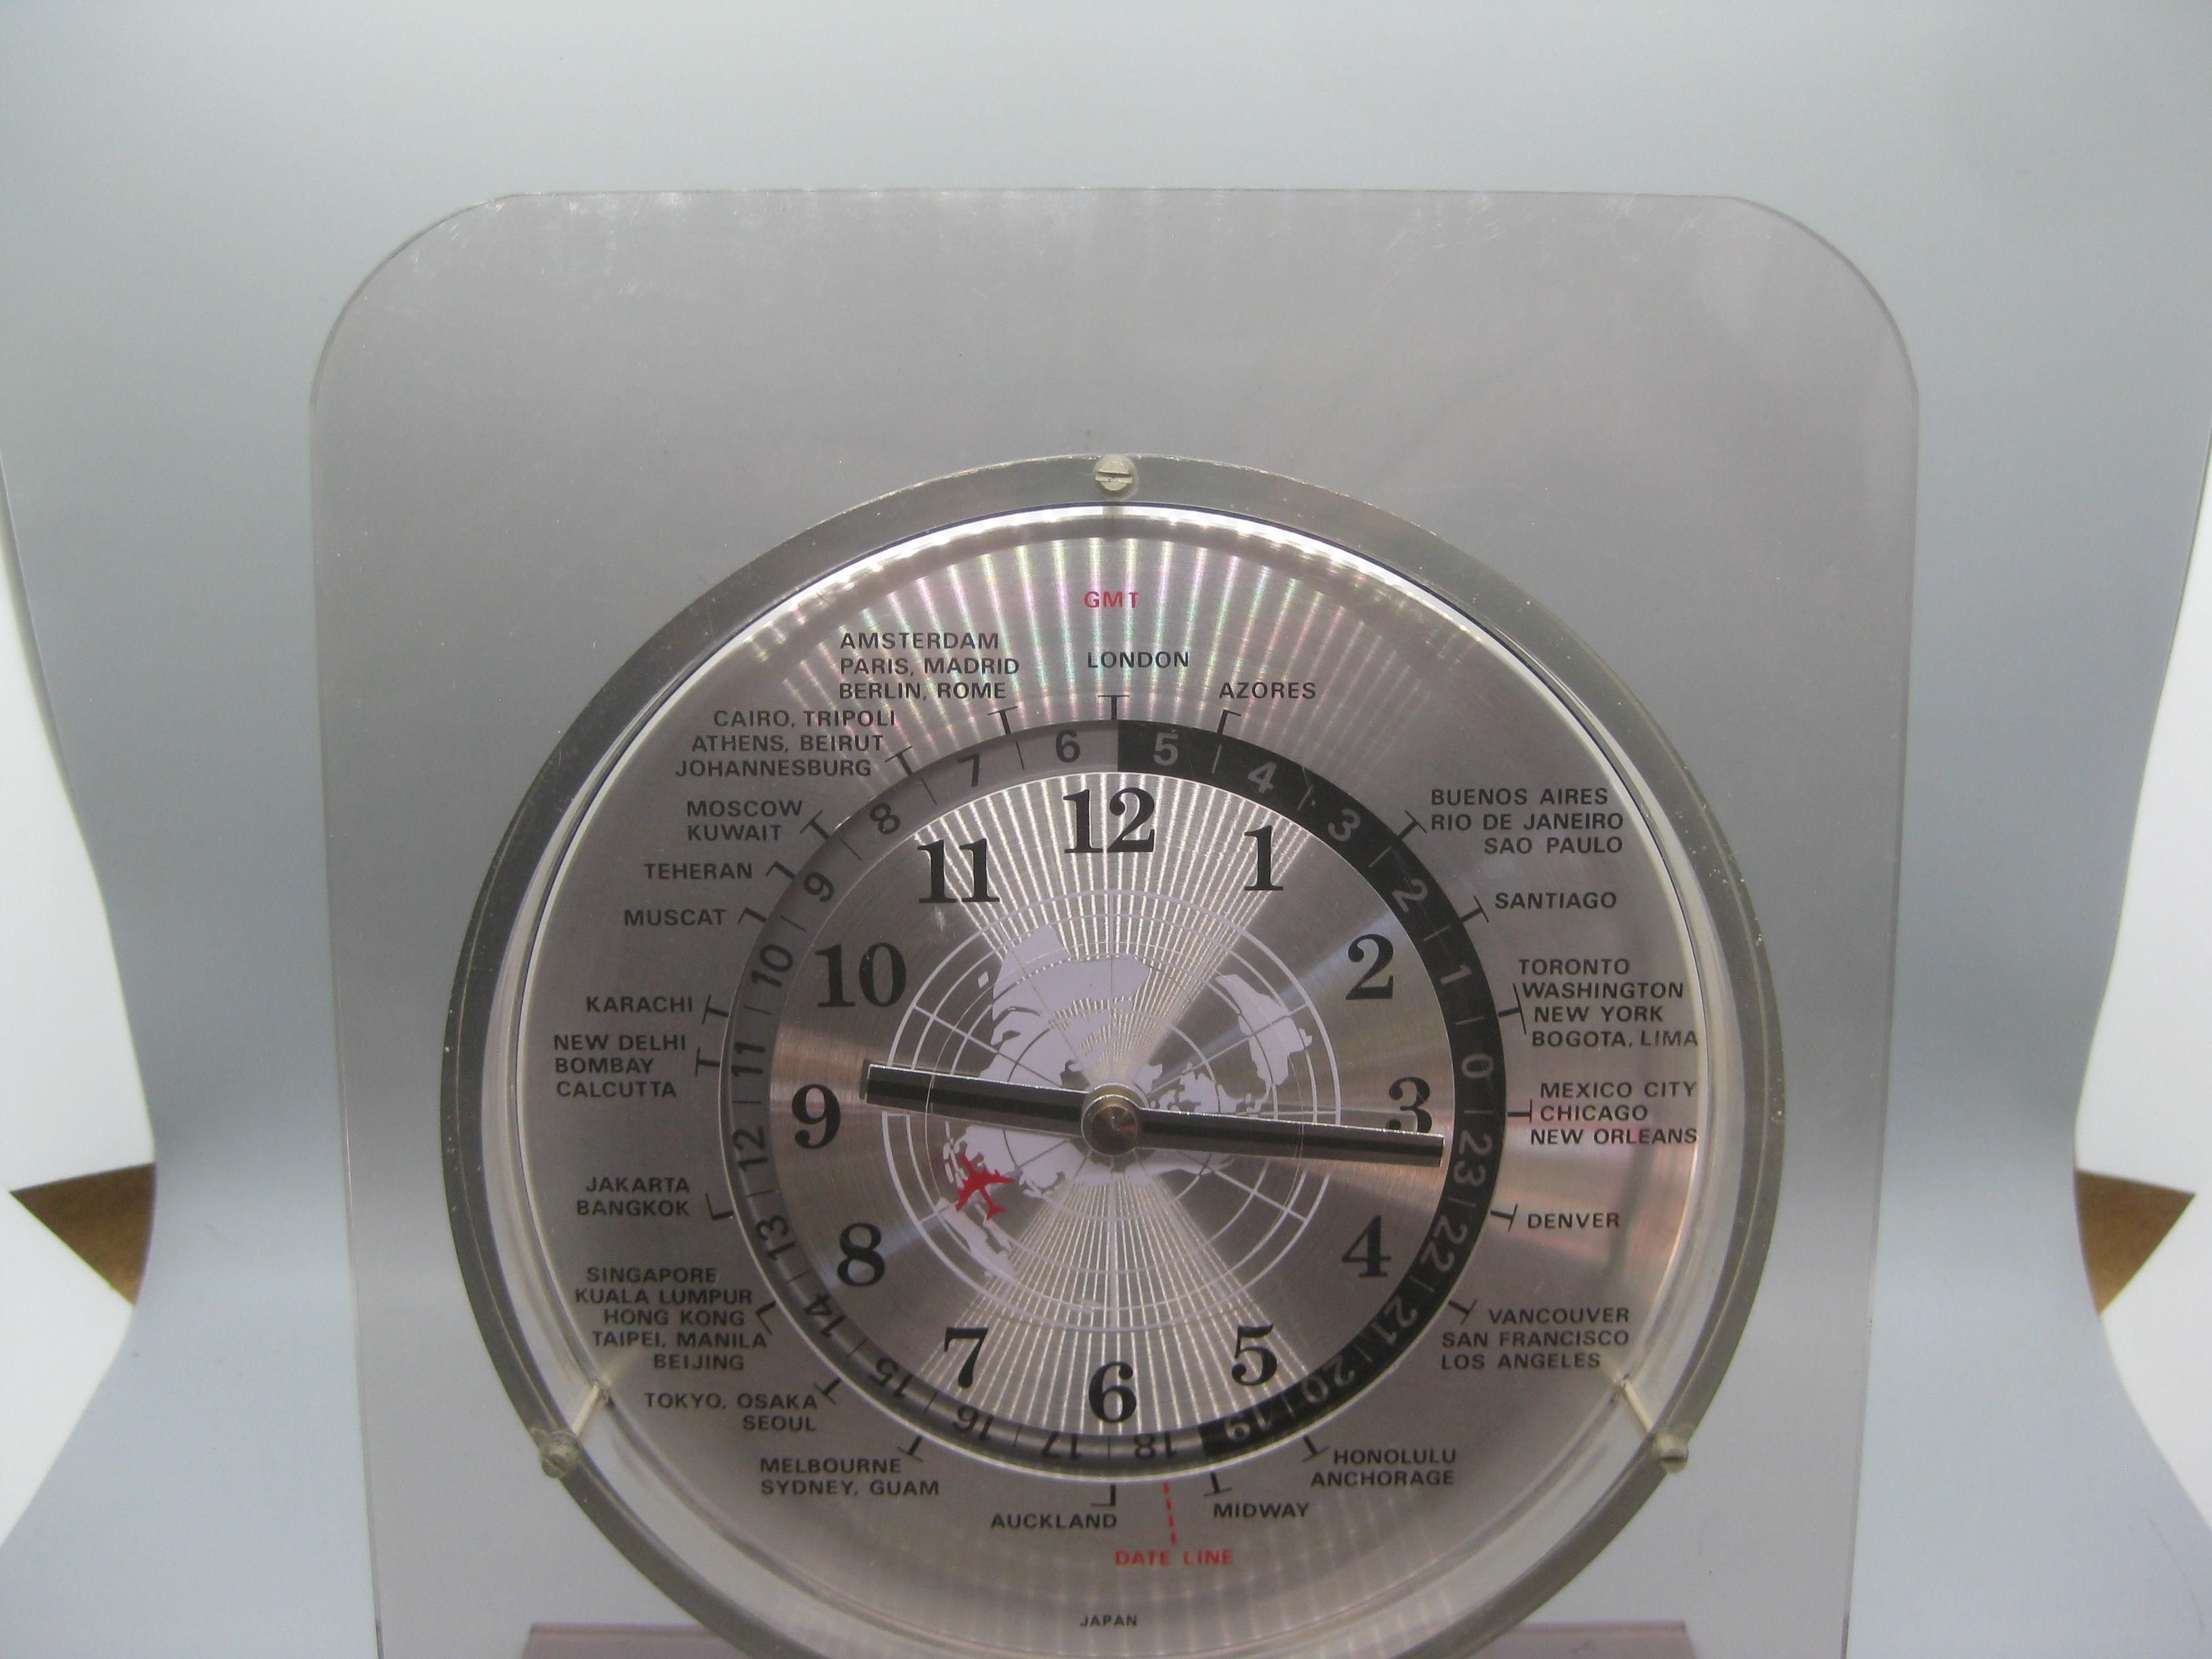 Wonderful smoked lucite/acrylic world desk/table clock that dates from the 1970's to 1980's. Made by GMT and works great. The clock is battery operated. In very nice original condition. No chips, no cracks and no repairs. There are some light